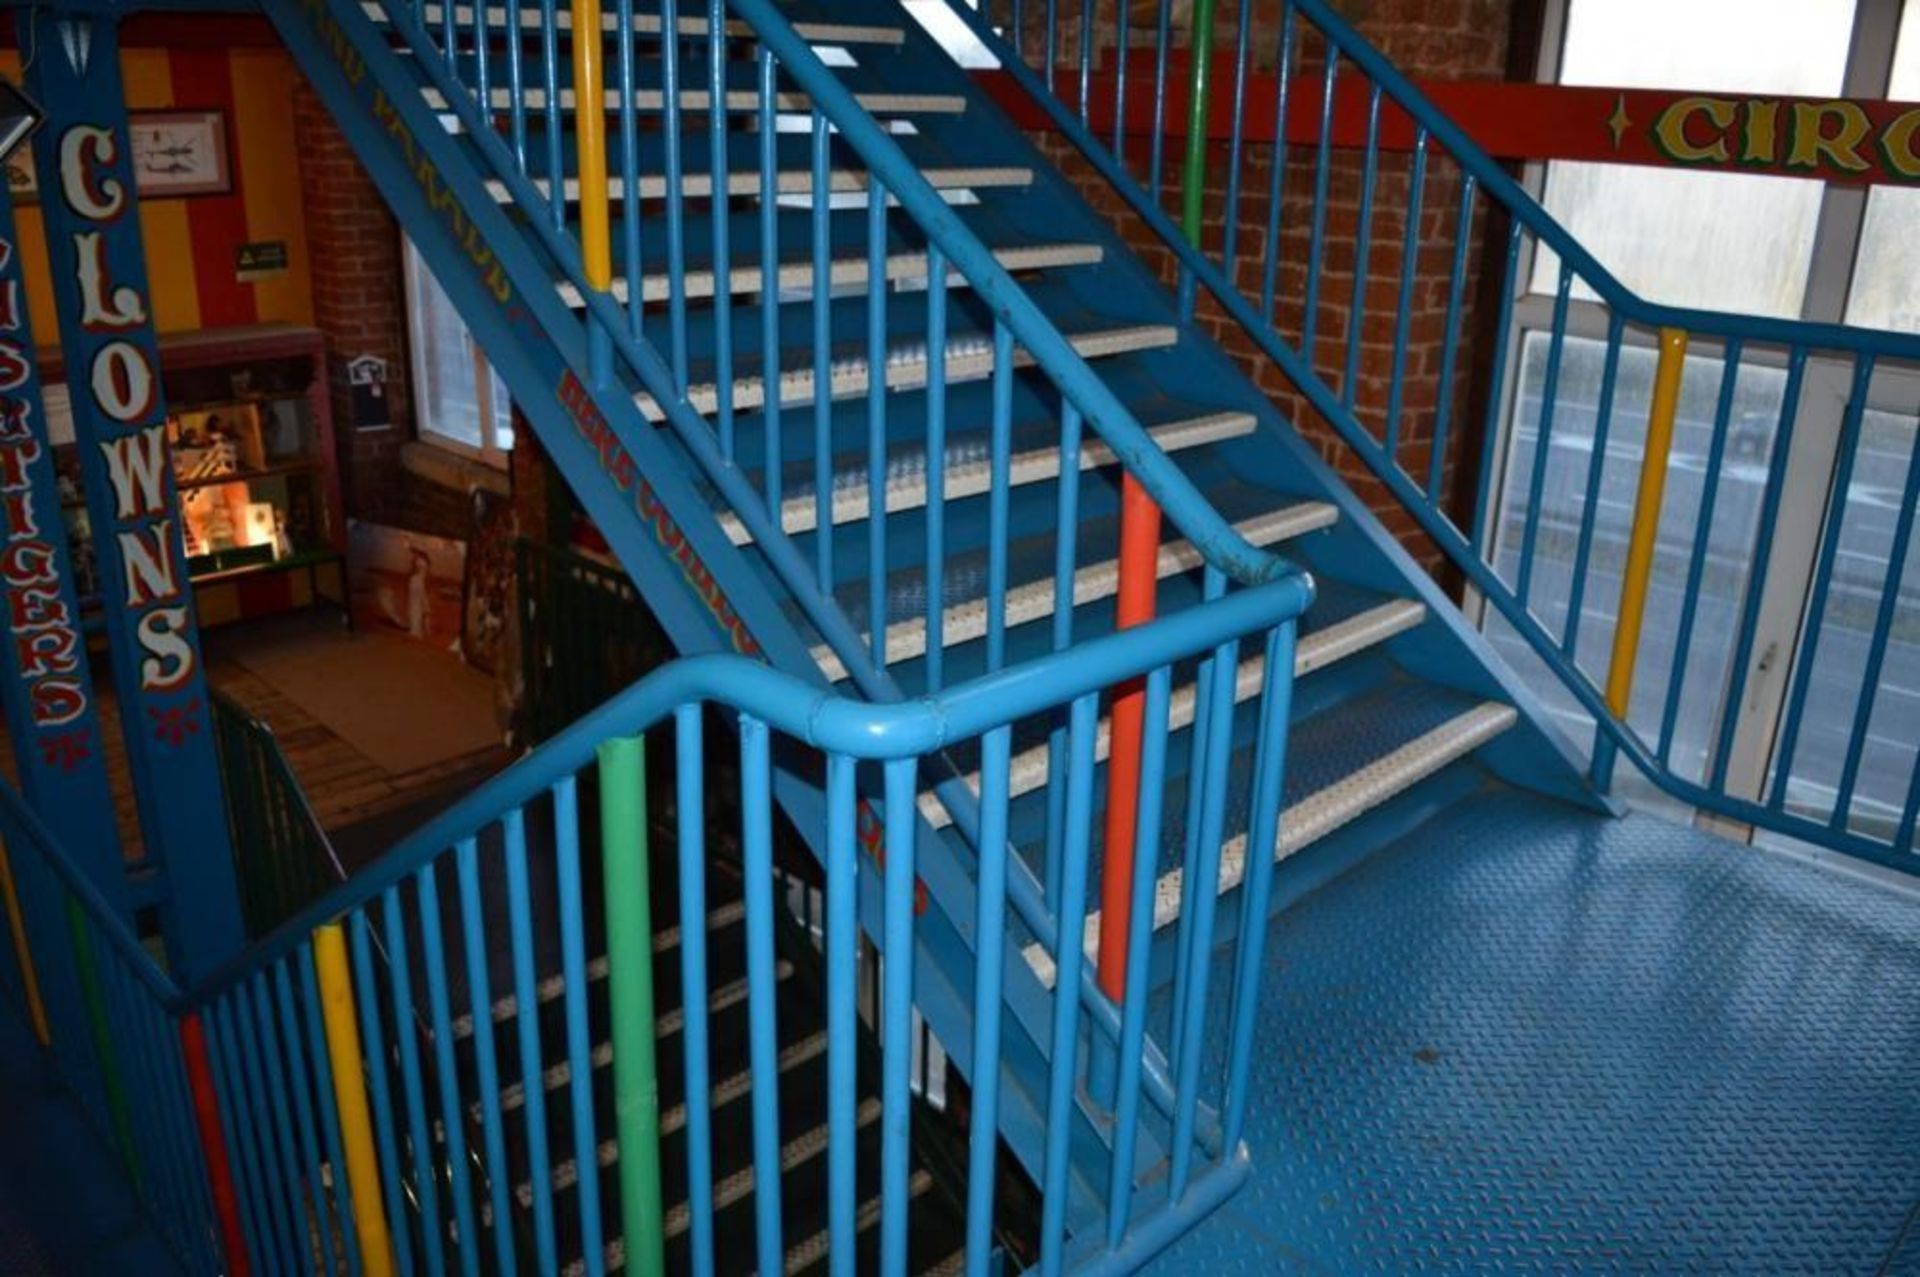 Botany Bay Heavy Duty Steel Customer Stairway - Covers Five Floors with an Overall Height of Approx - Image 21 of 30